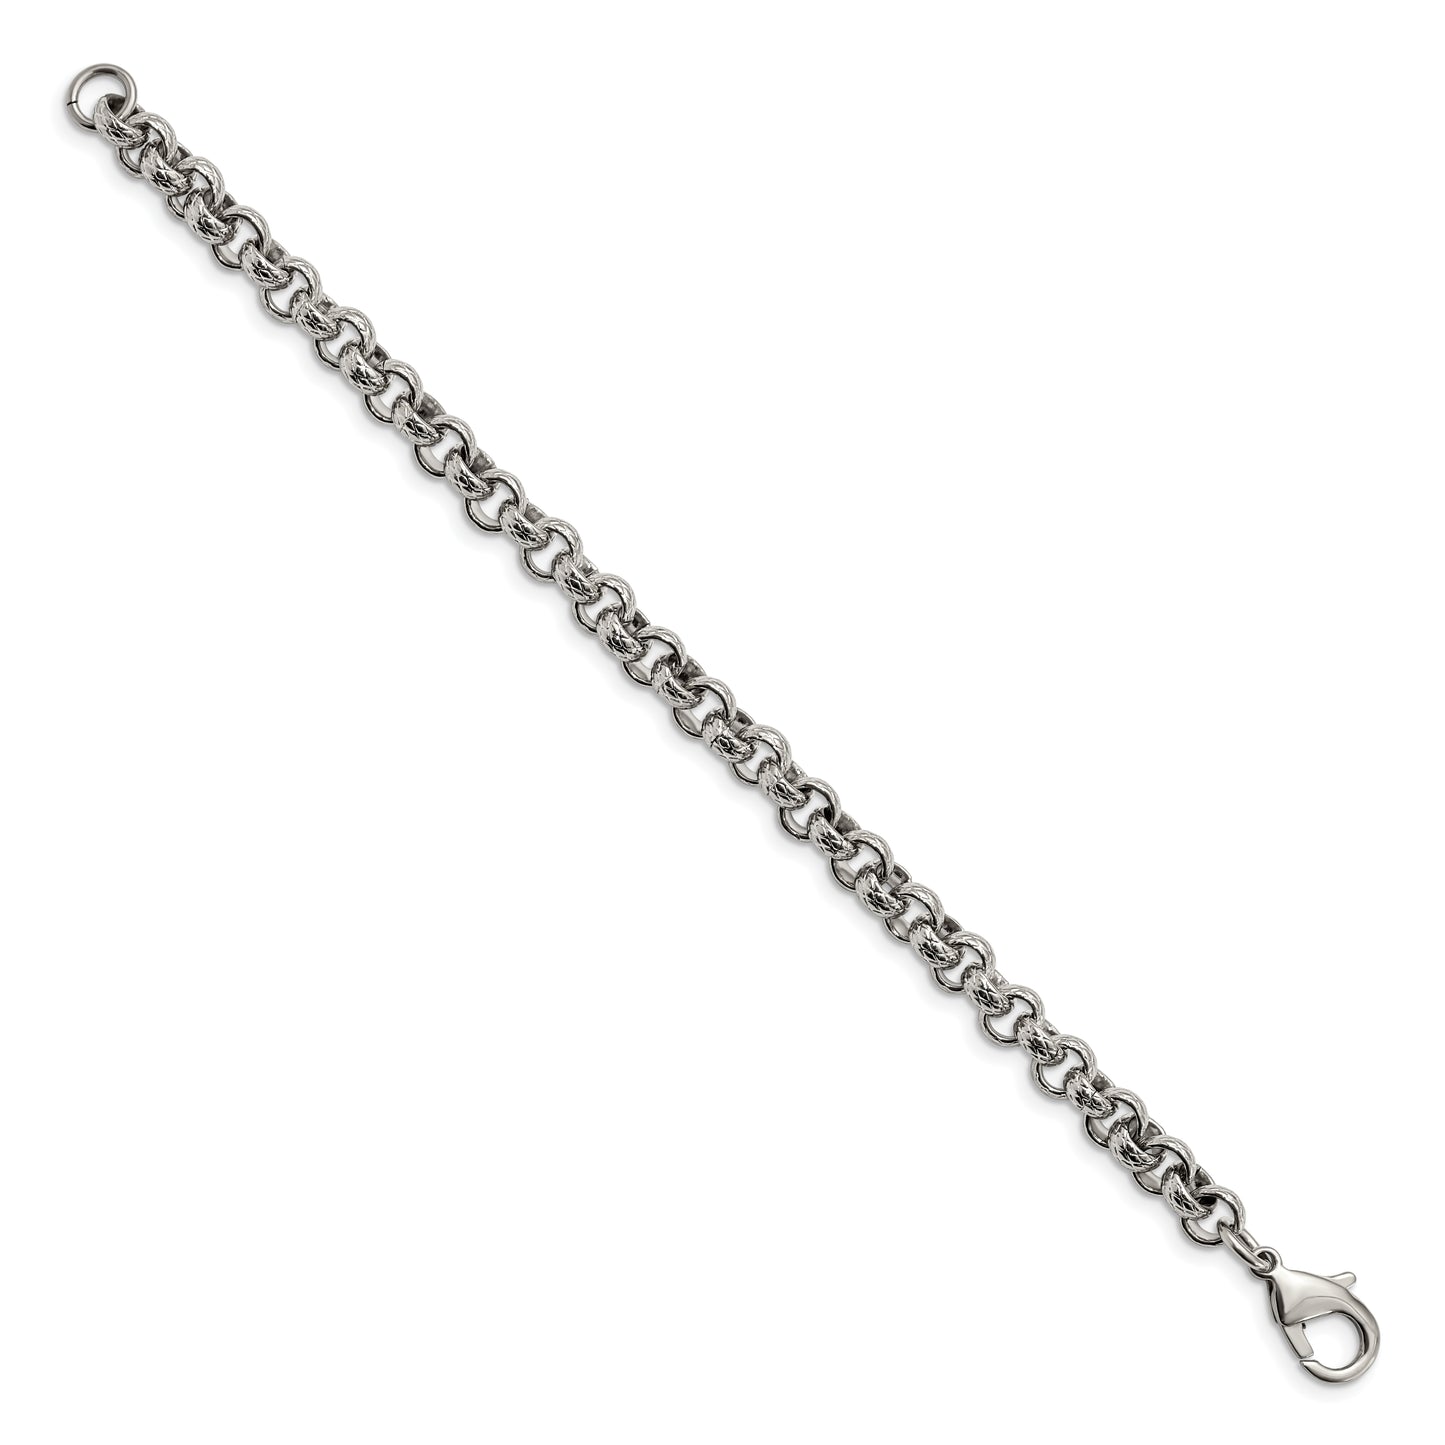 Stainless Steel Polished and Textured Link 8.25in Bracelet